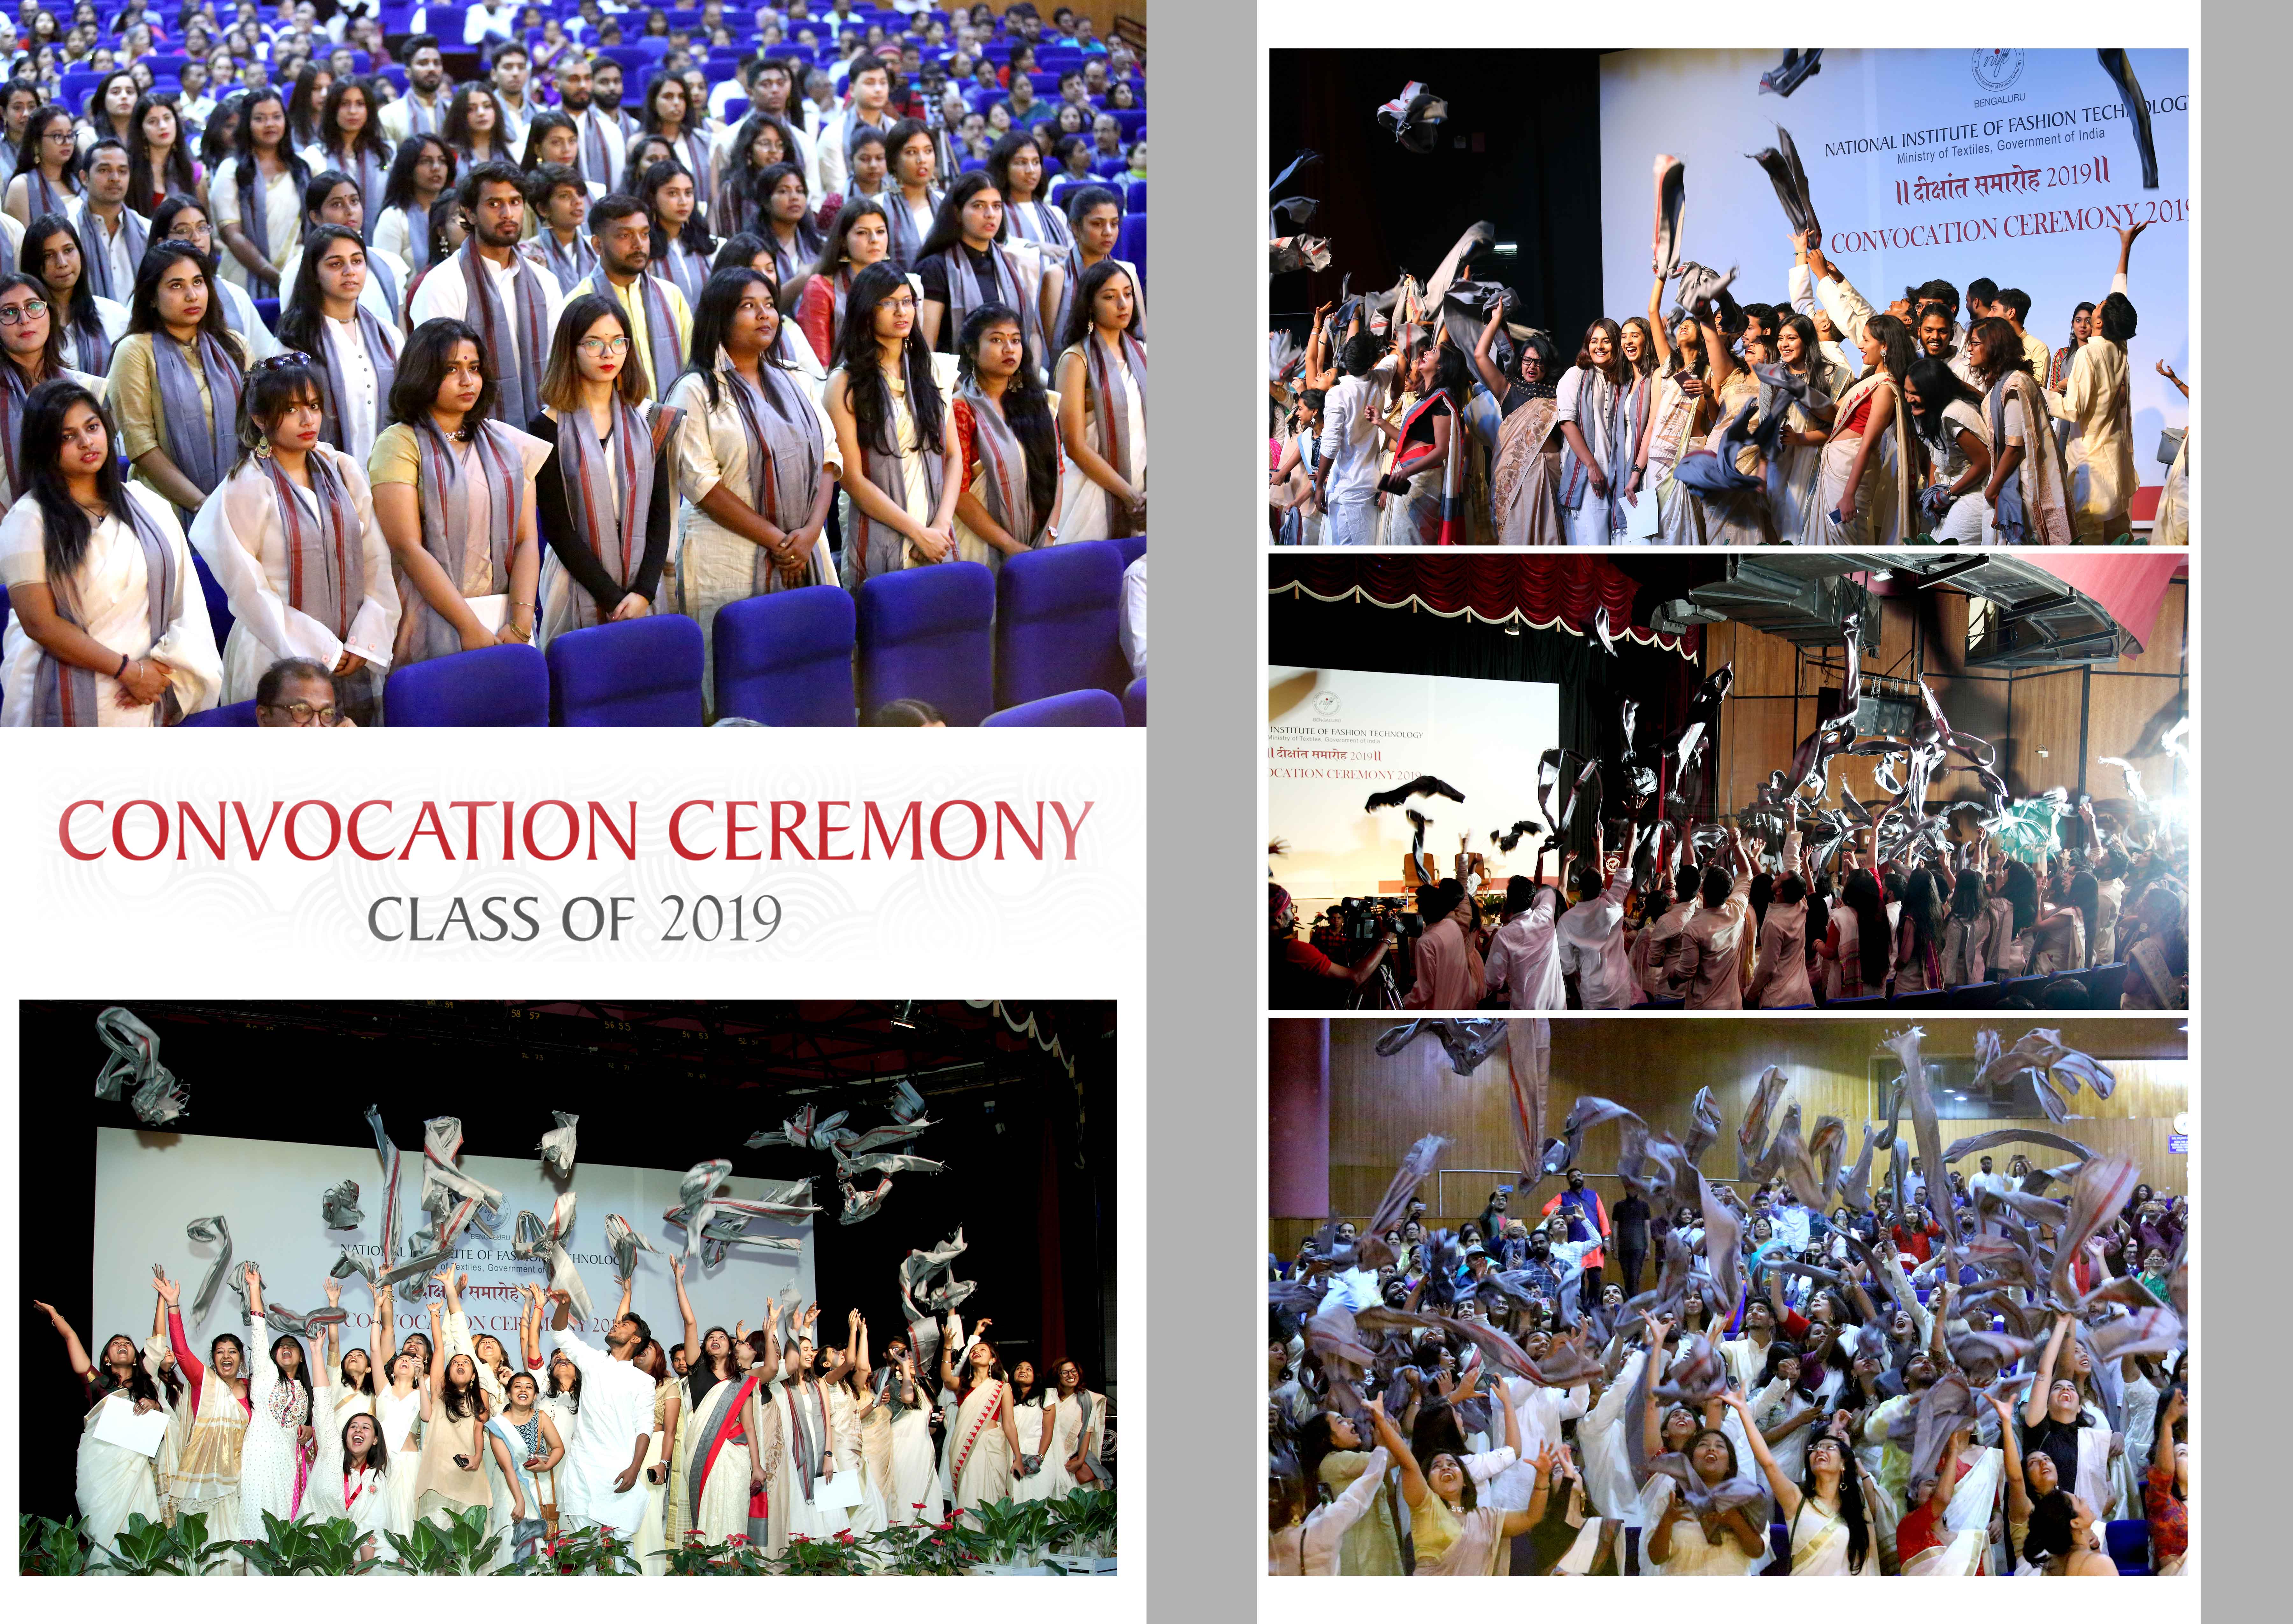 Convocation of the Batch 2019